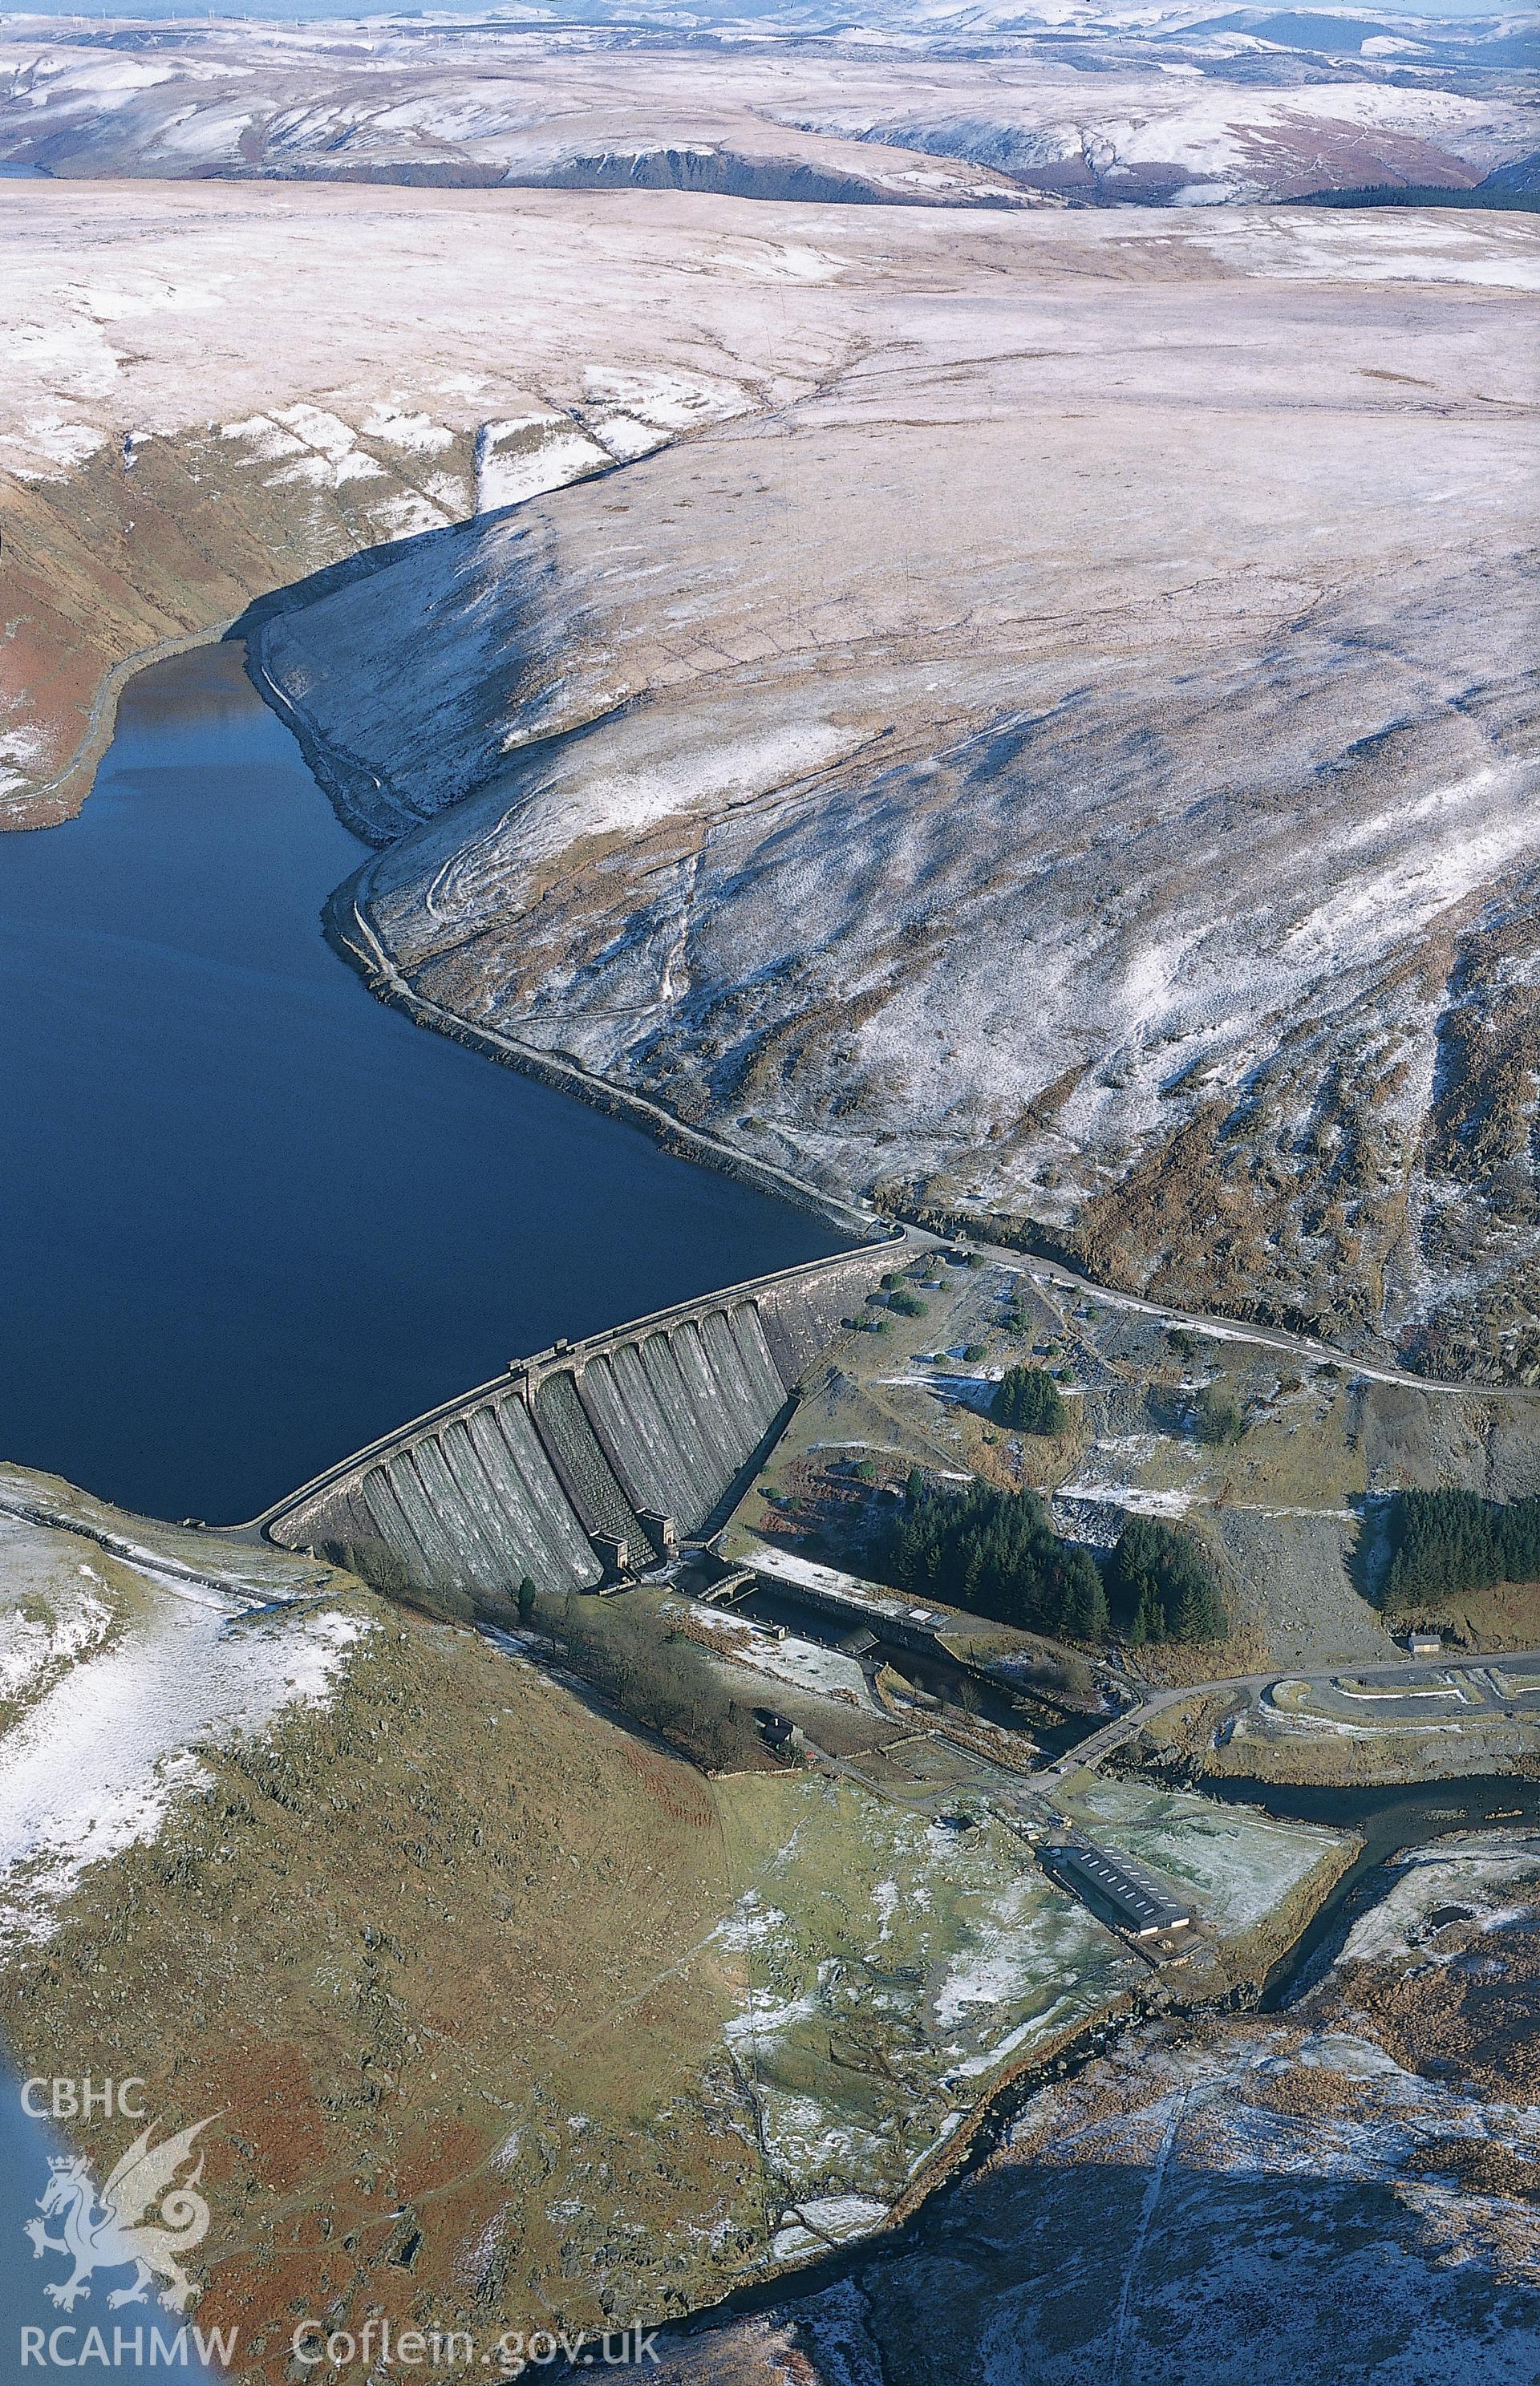 RCAHMW colour oblique aerial photograph of Claerwen Dam, Elan Valley taken on 31/01/2003 by Toby Driver